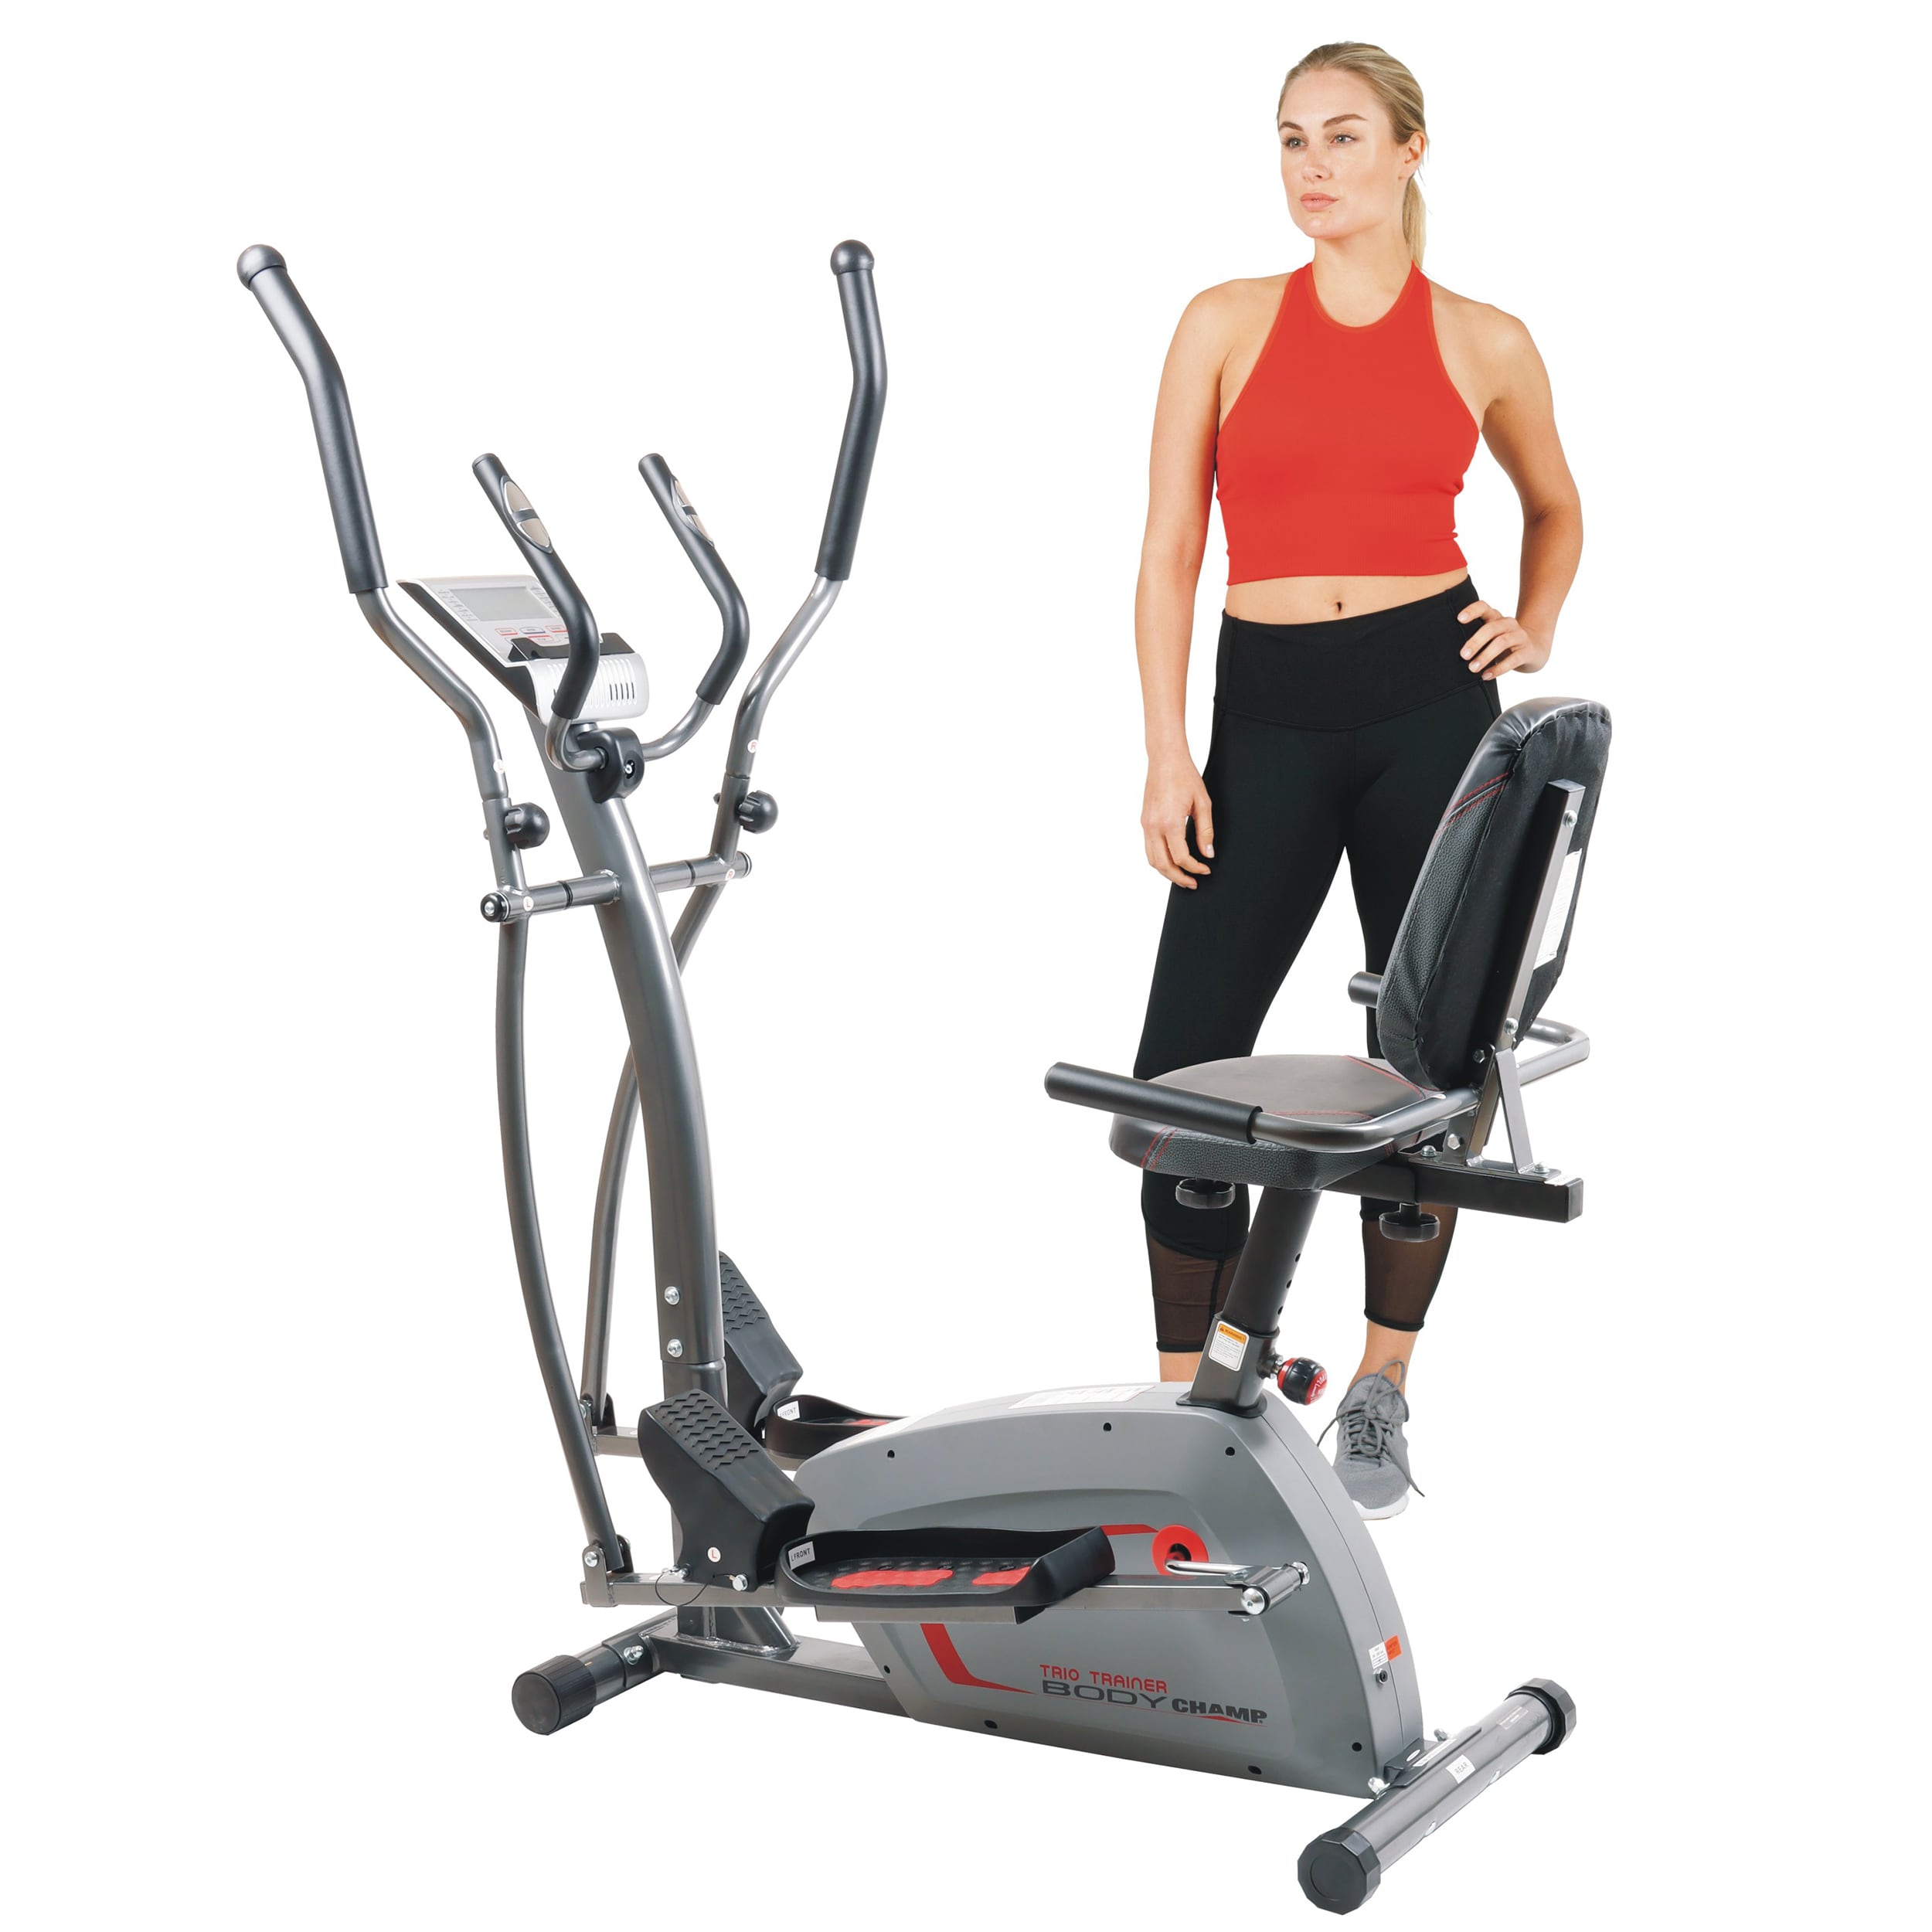 Body Flex Sports Trio-Trainer Exercise Bikes at the Exercise in Bike department Recumbent Magnetic Cycle